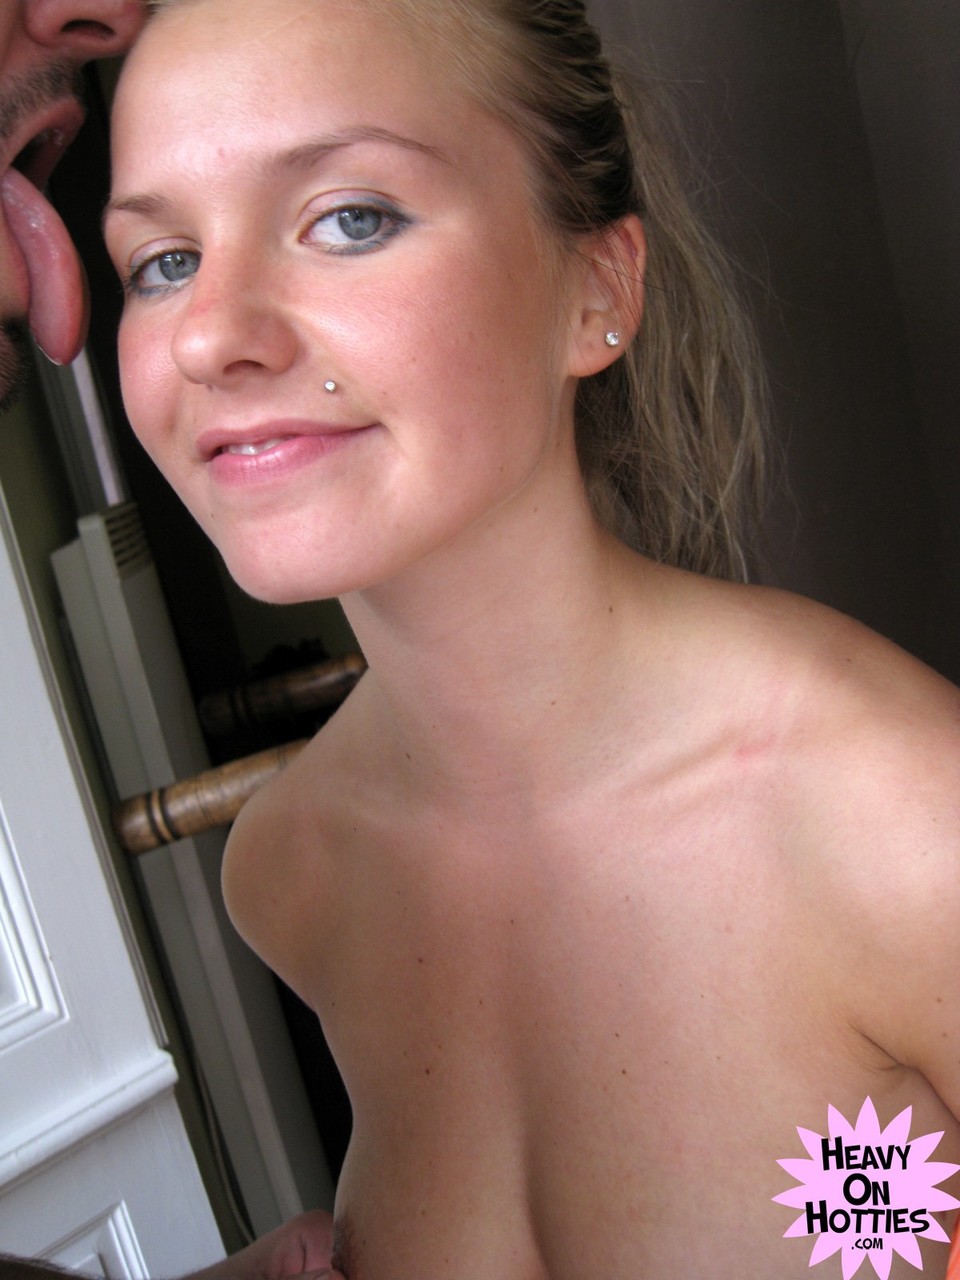 Blue-eyed babe with a tongue piercing Bellagives POV head and gets facialed 色情照片 #427074418 | Heavy On Hotties Pics, Bella, Handjob, 手机色情